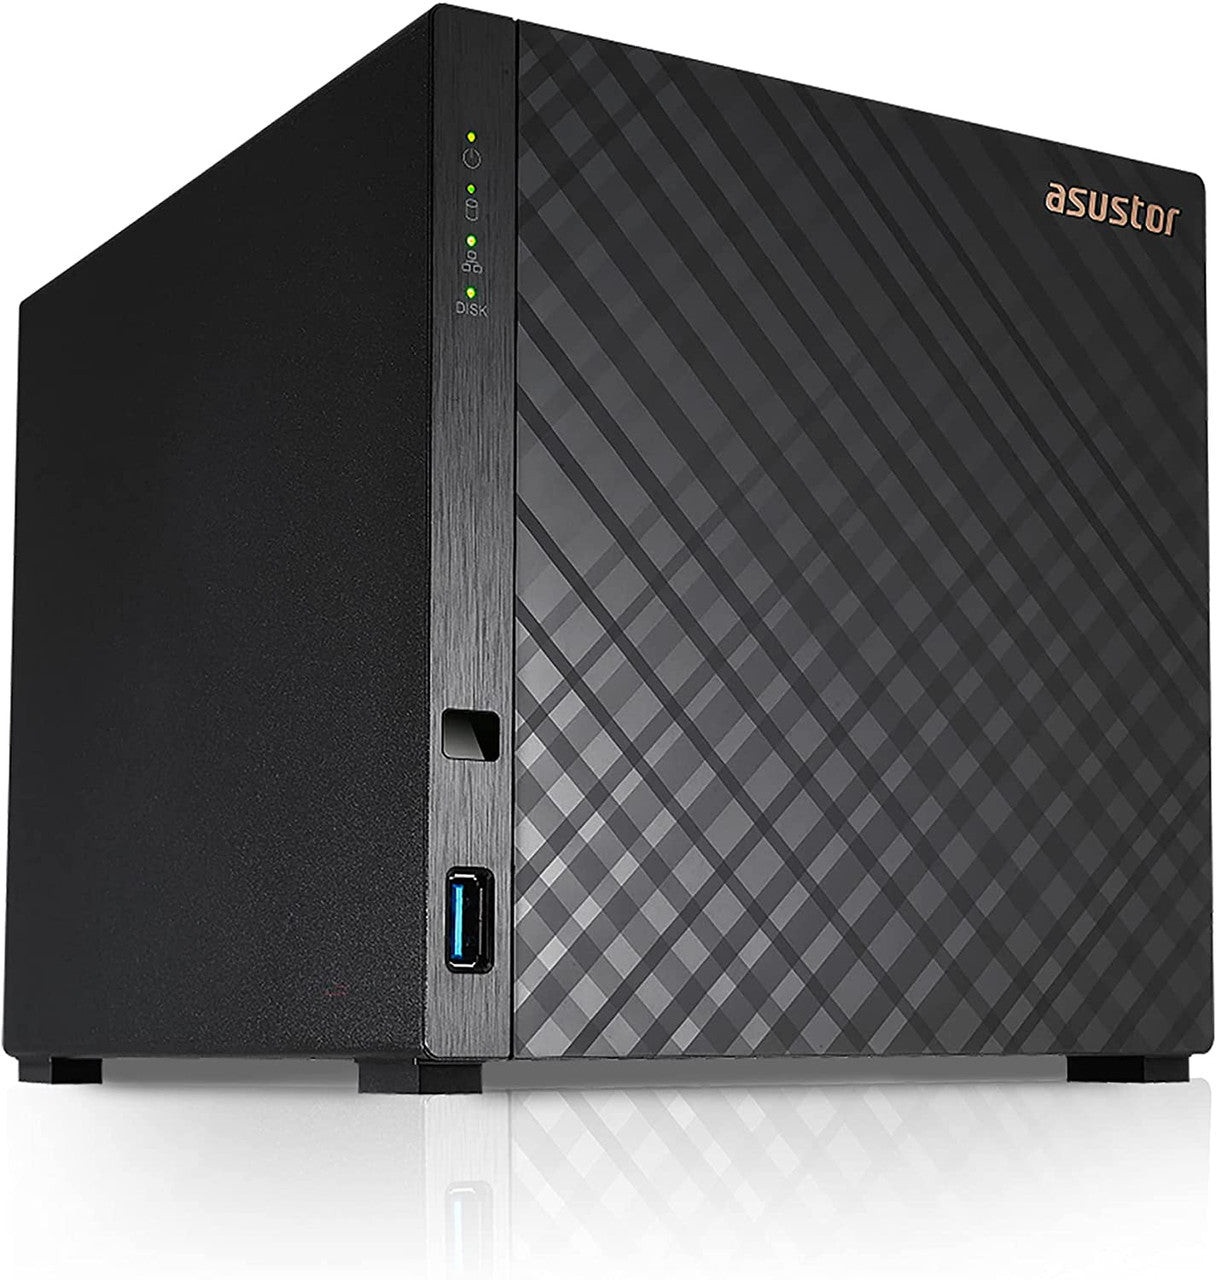 Asustor AS1104T 4-Bay Drivestor 4 NAS with 1GB RAM and 56TB (4x14TB) Seagate Ironwolf PRO Drives